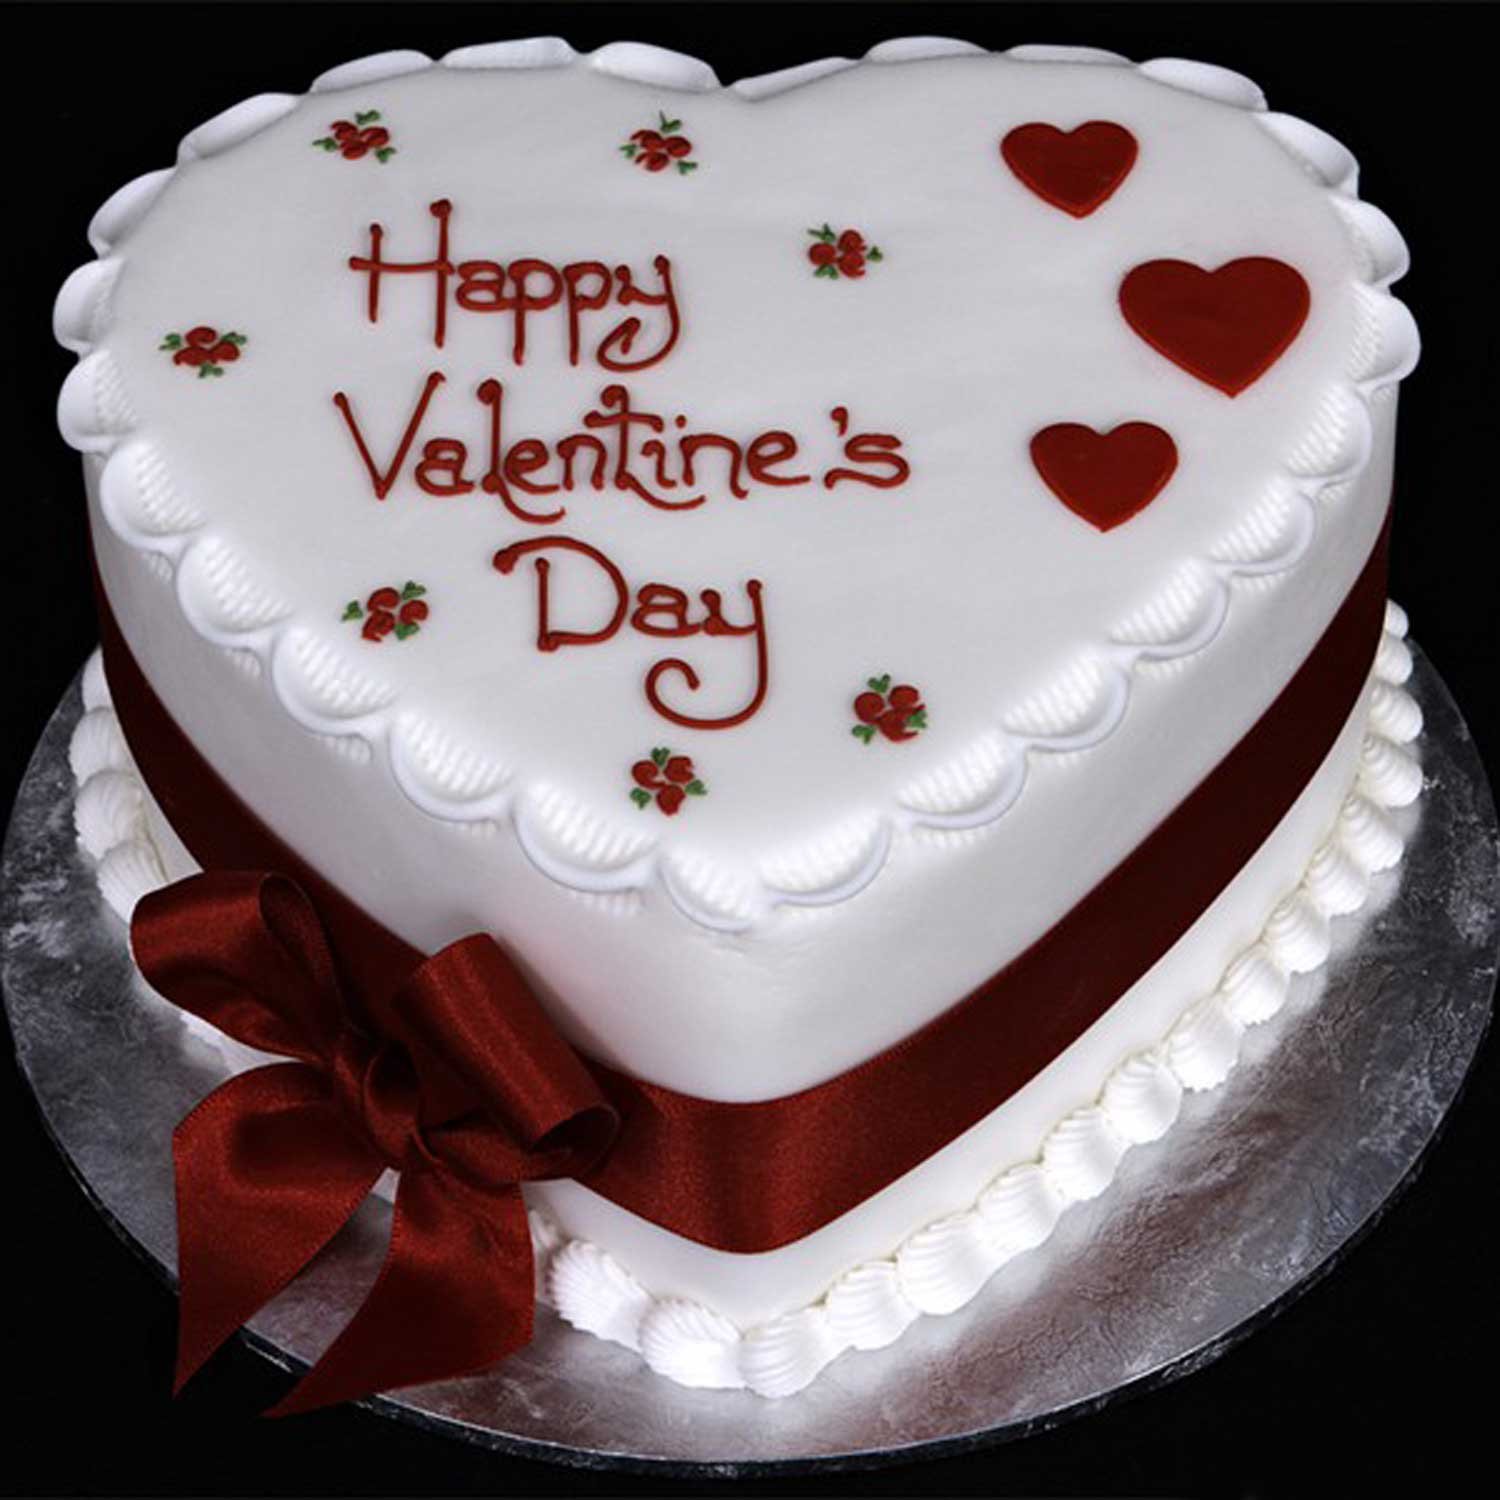 Hot Red Valentine Heart Fondant Cake Delivery in Delhi NCR - ₹1,649.00 Cake  Express